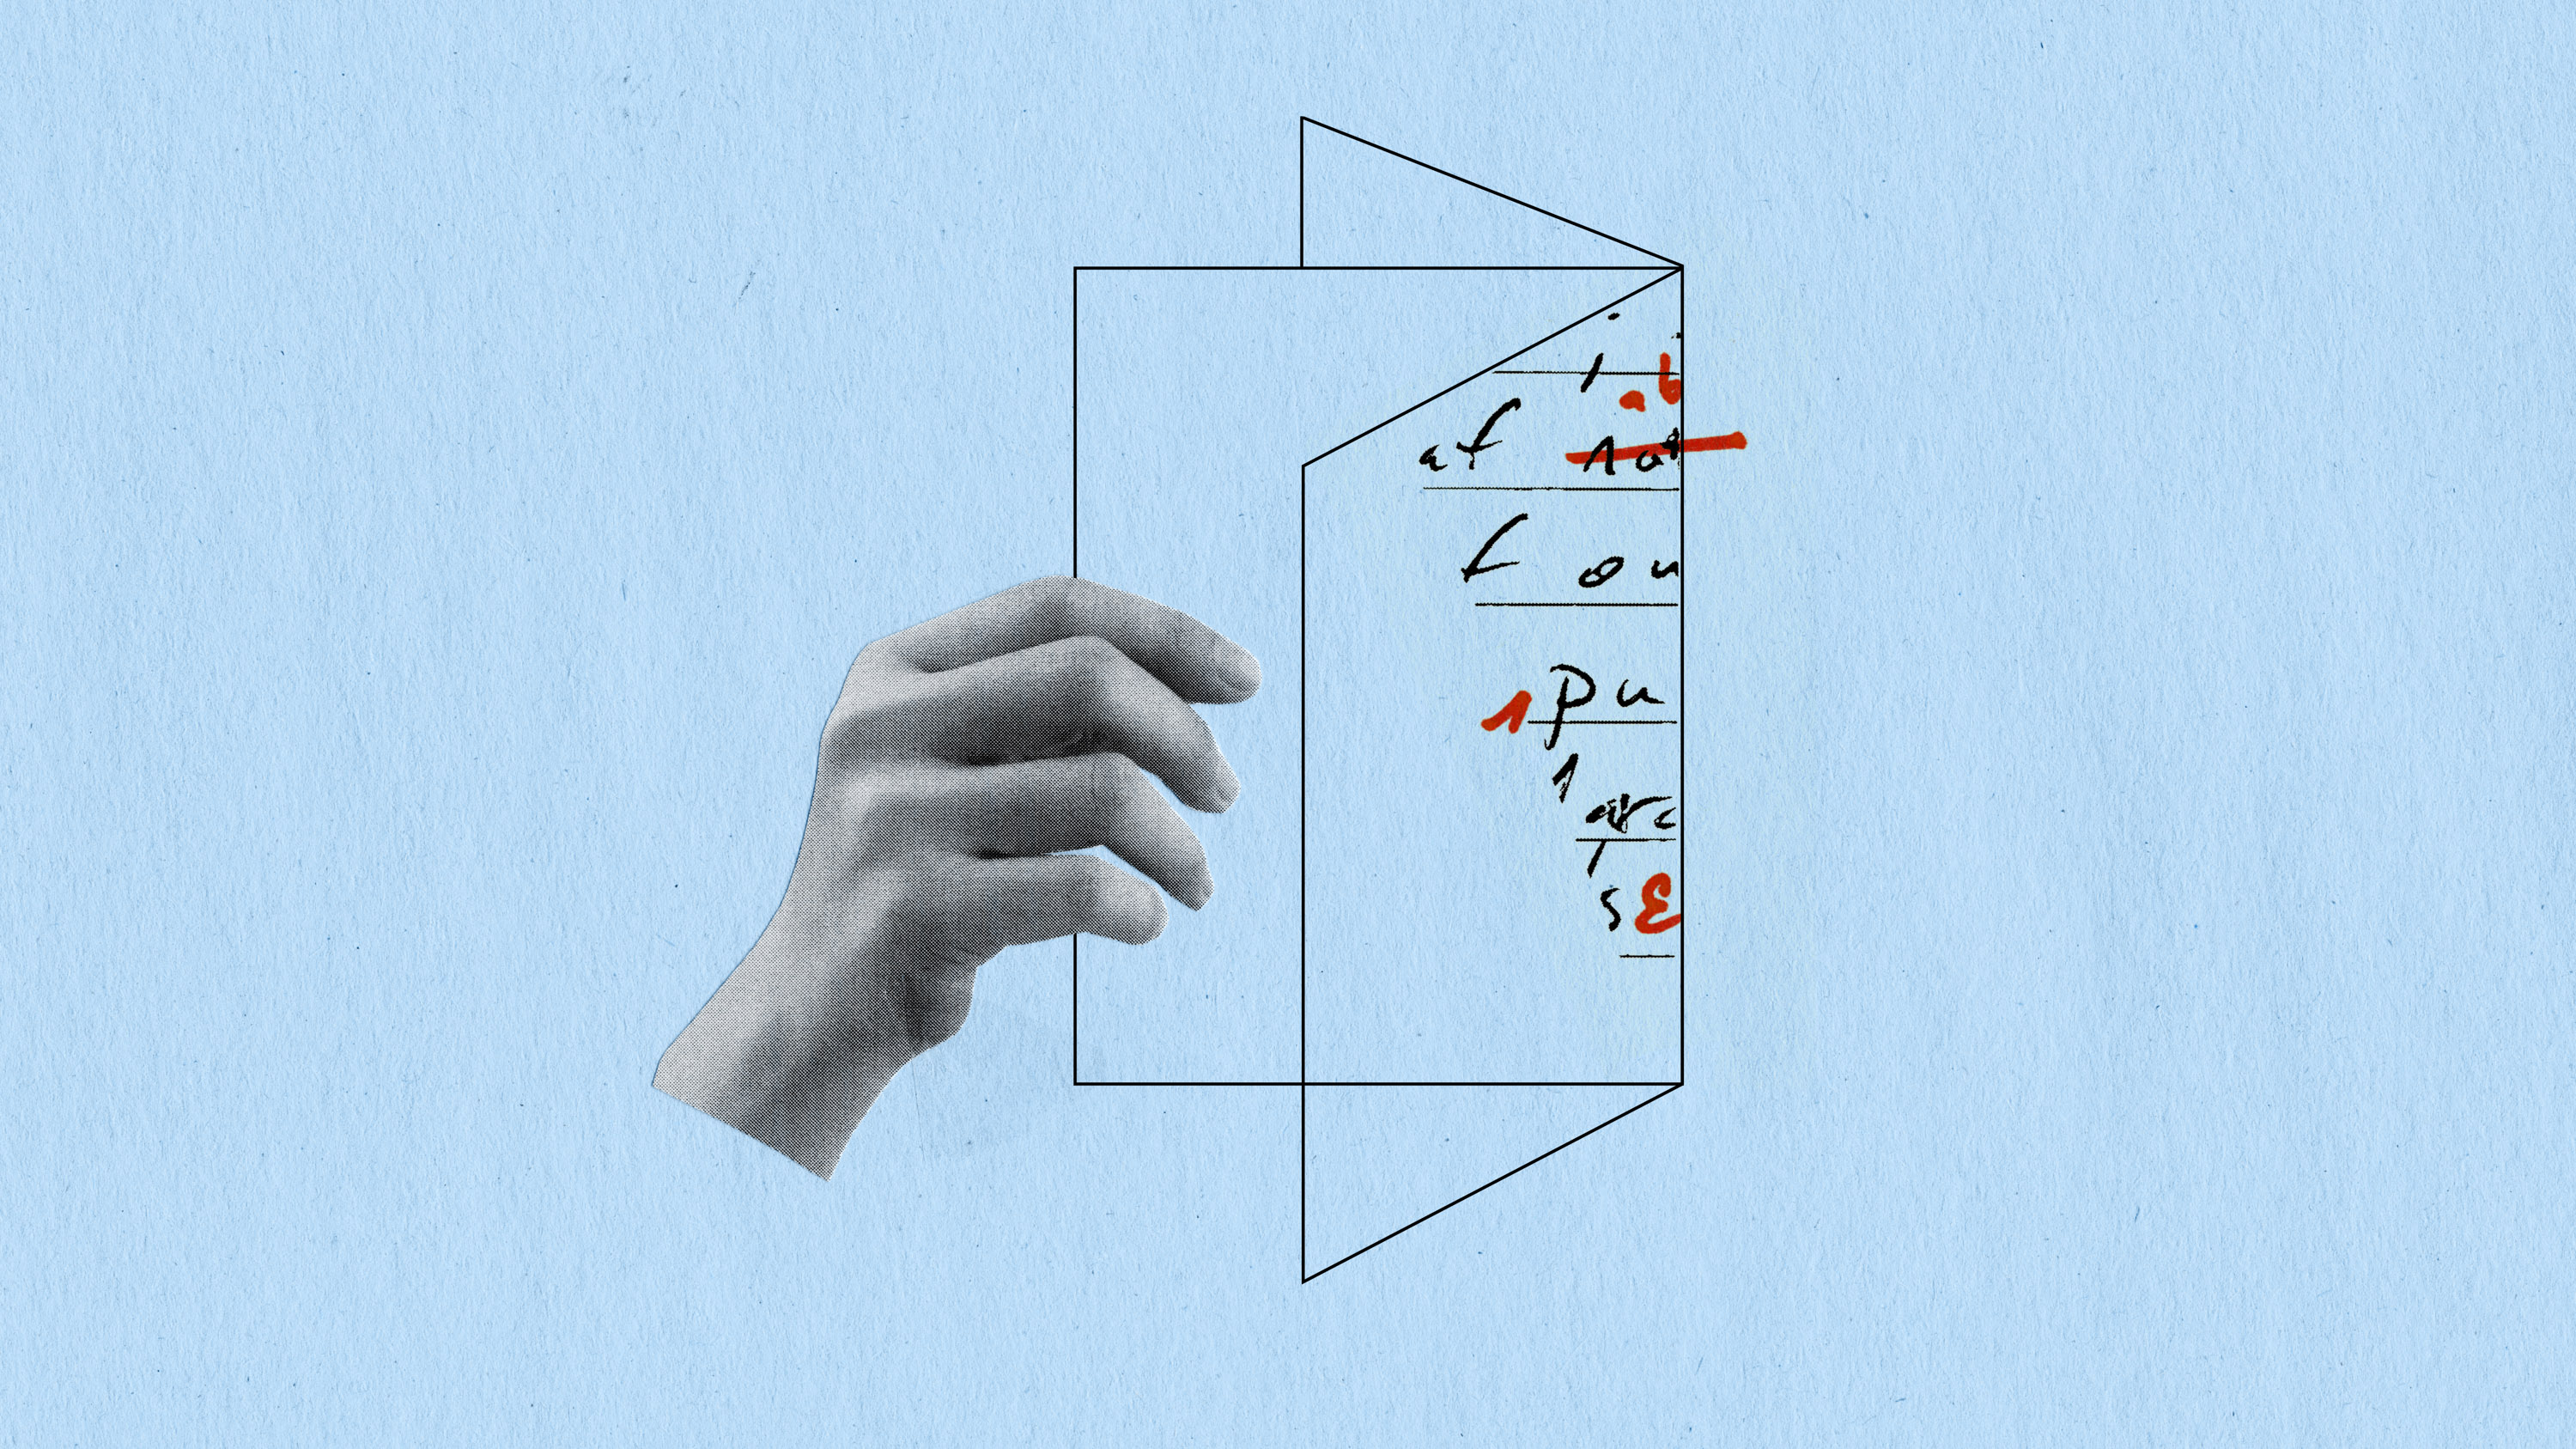 hand holds the shape of an edited magazine represented by vector lines with a fragment of marked up text